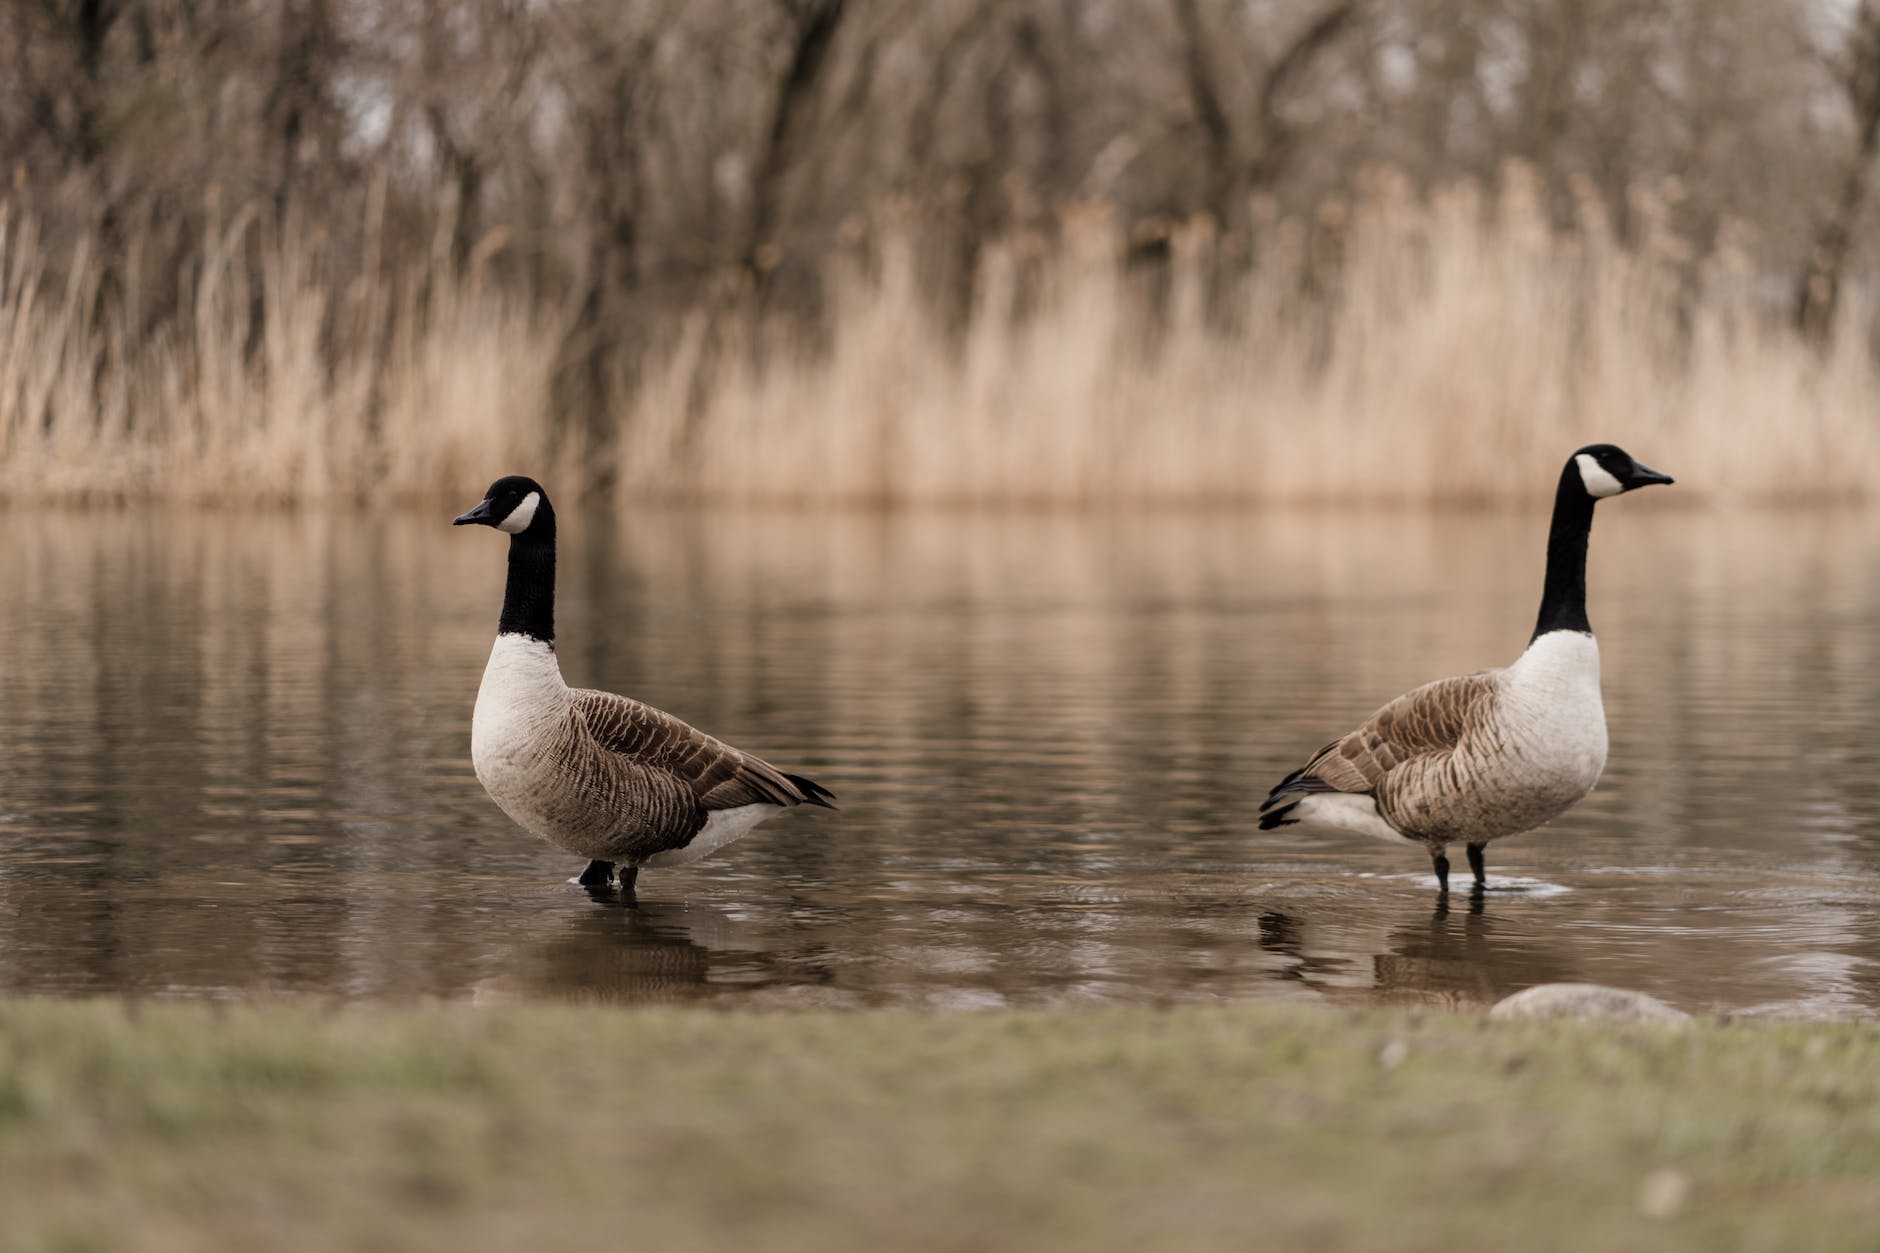 two canada geese in water